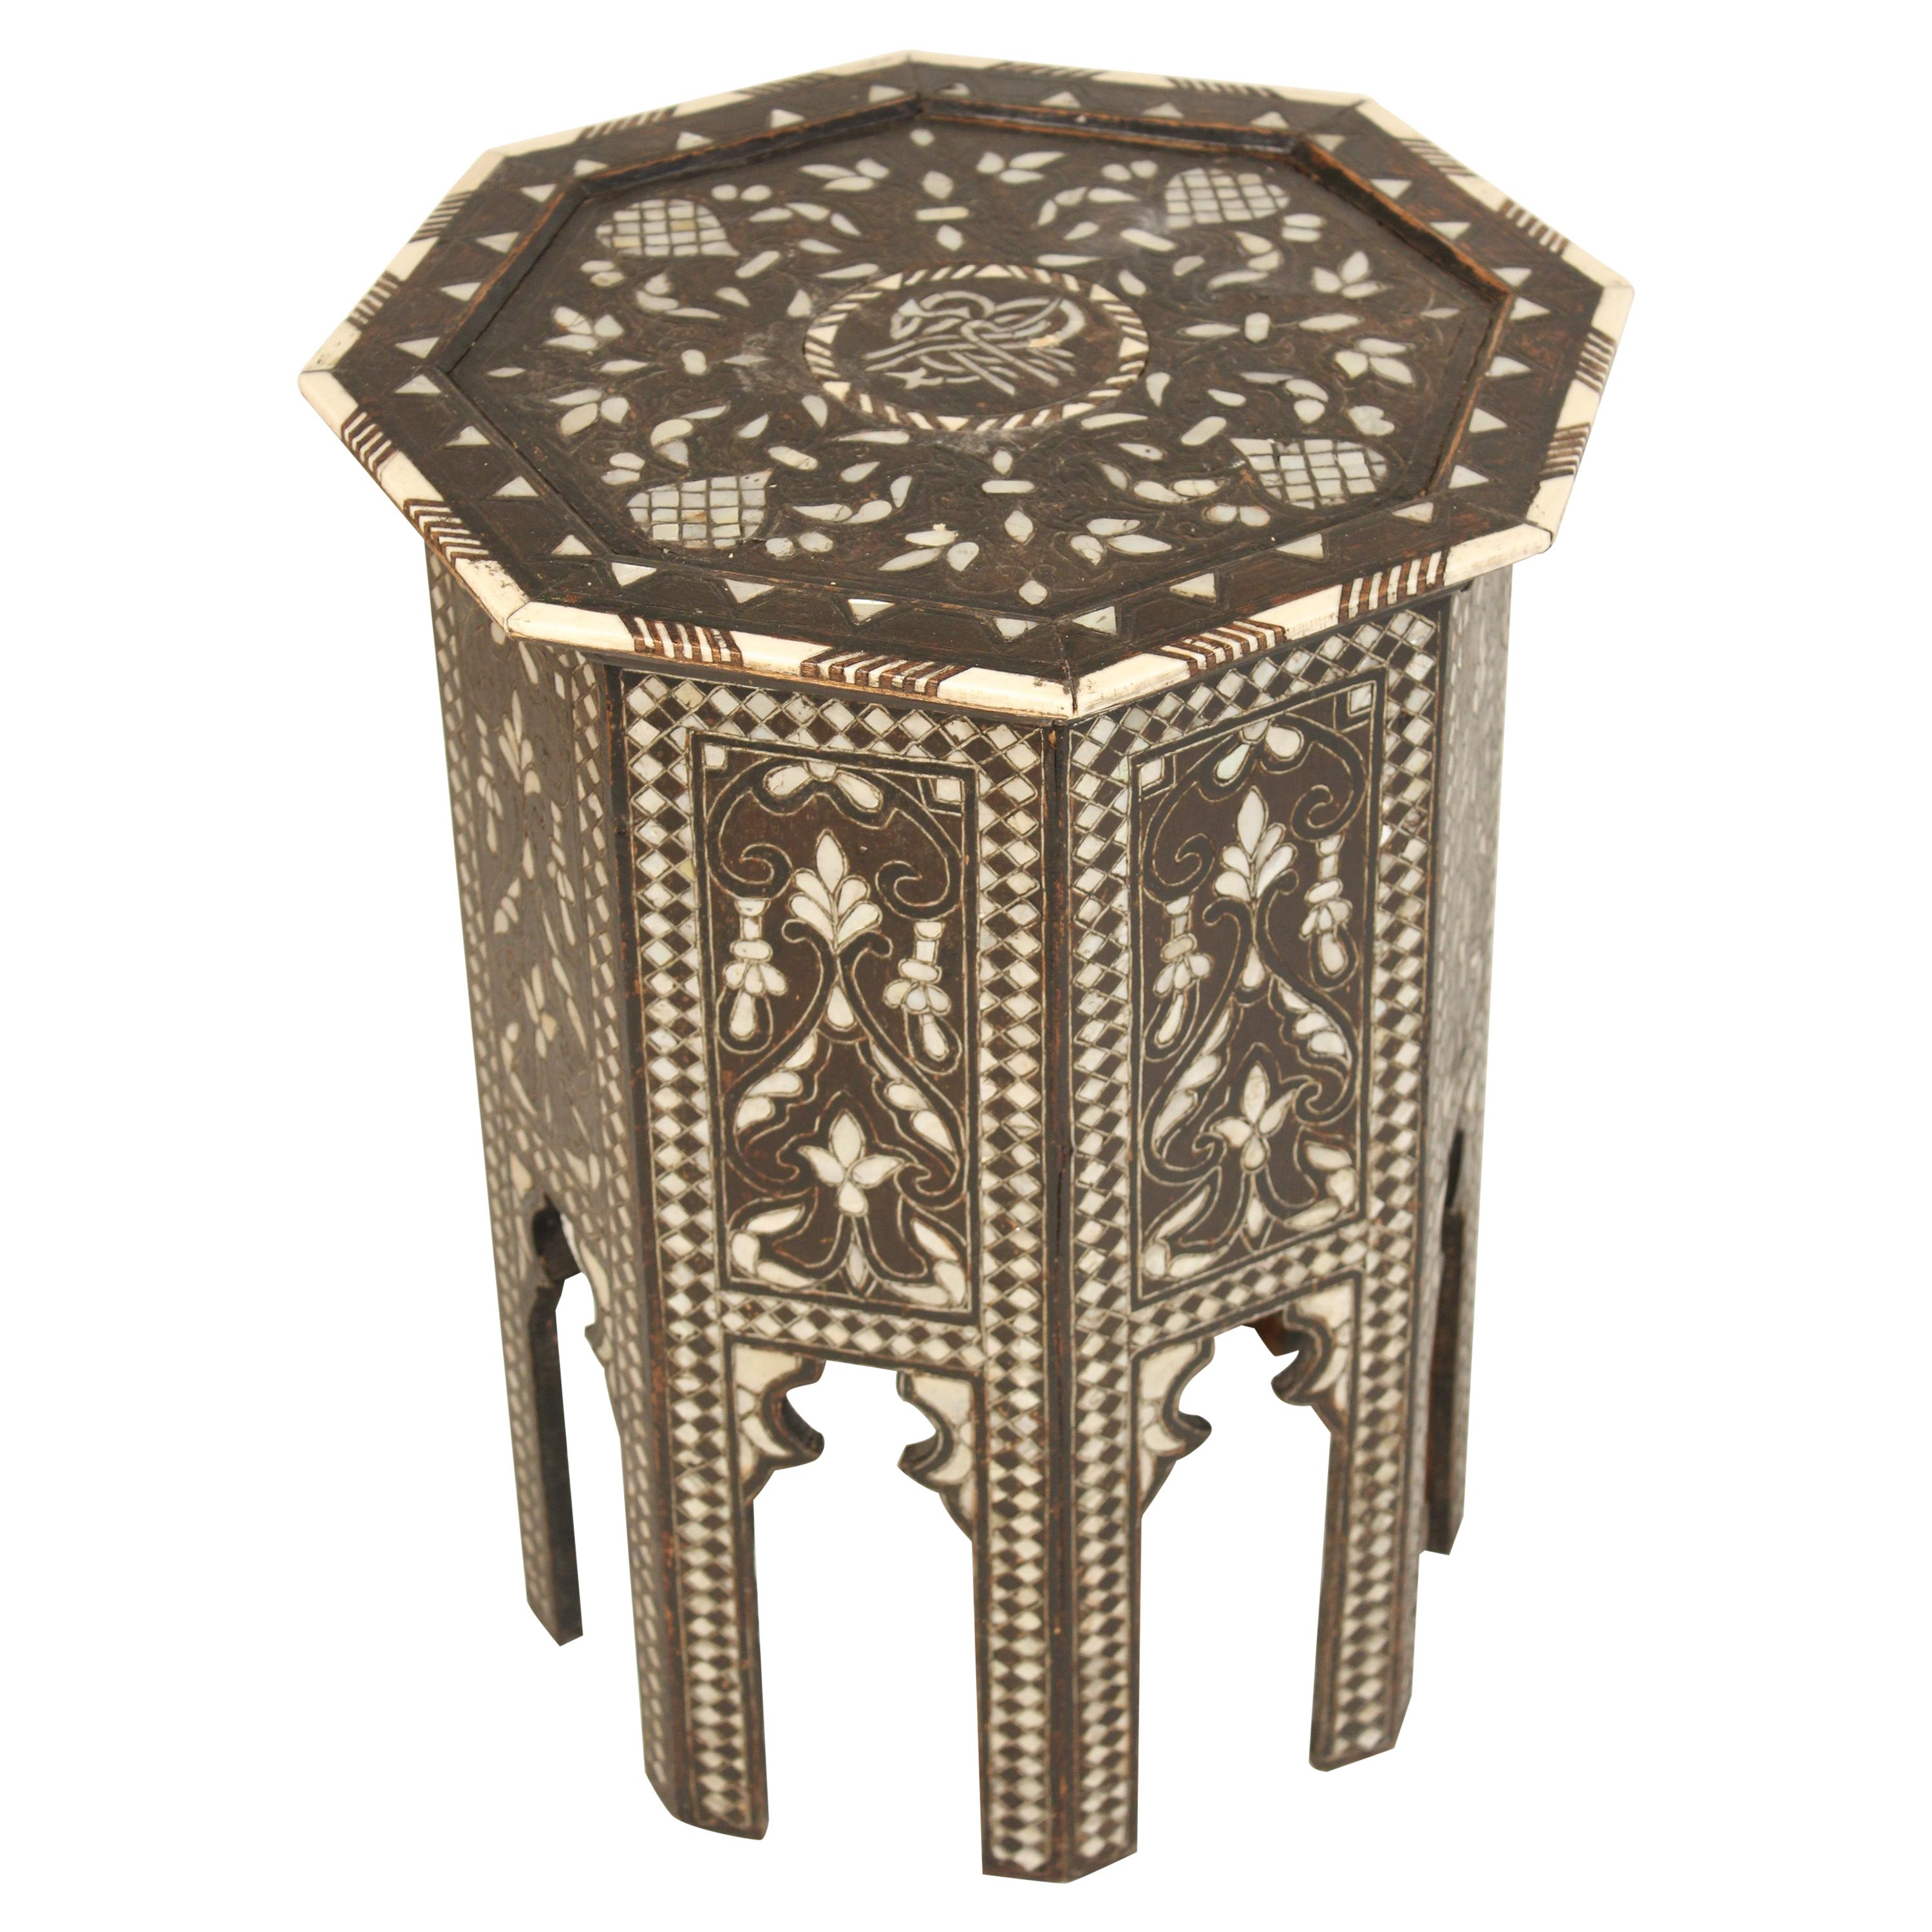 Middle Eastern Mother of Pearl Inlaid Occasional Table